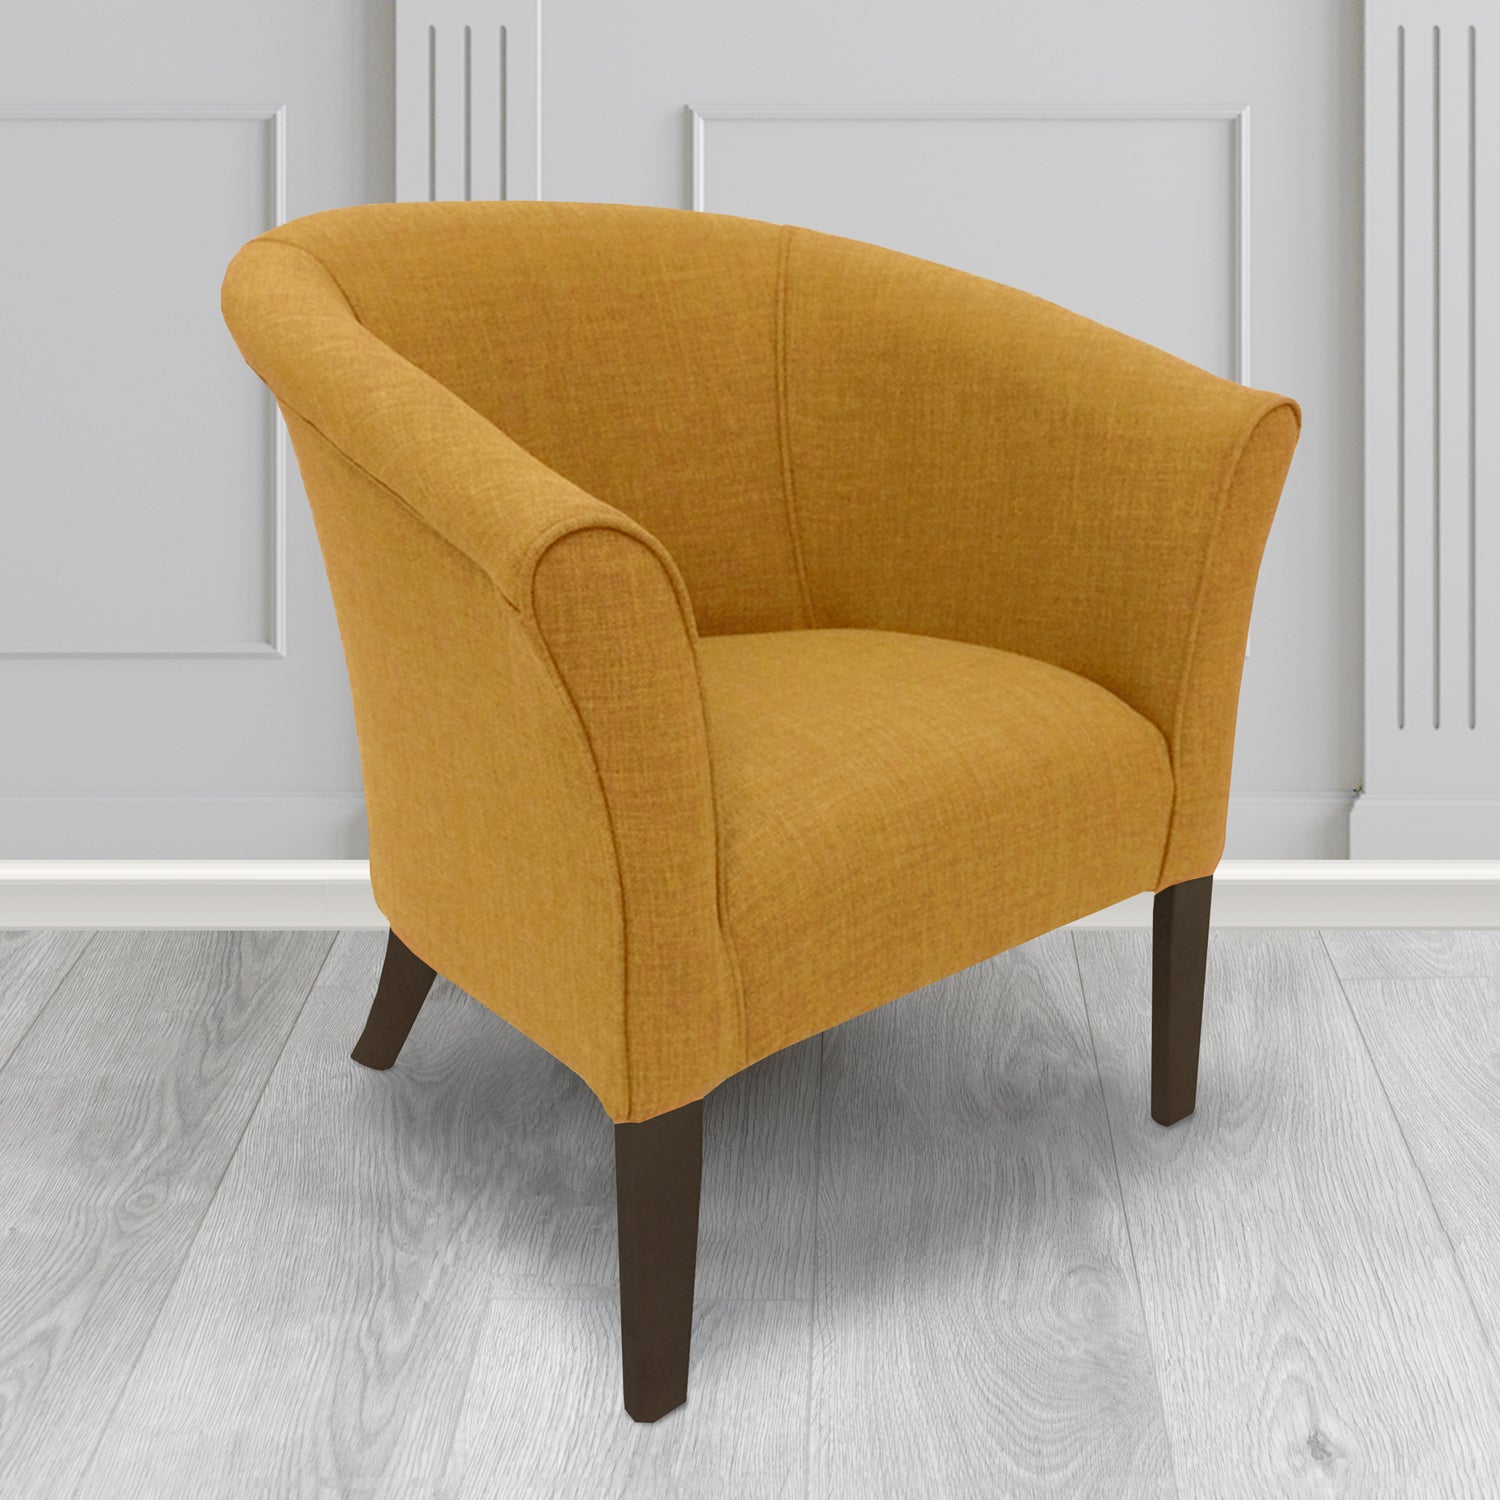 Quill Tub Chair in Linetta Mustard Crib 5 Plain Fabric - Antimicrobial, Stain Resistant & Waterproof - The Tub Chair Shop